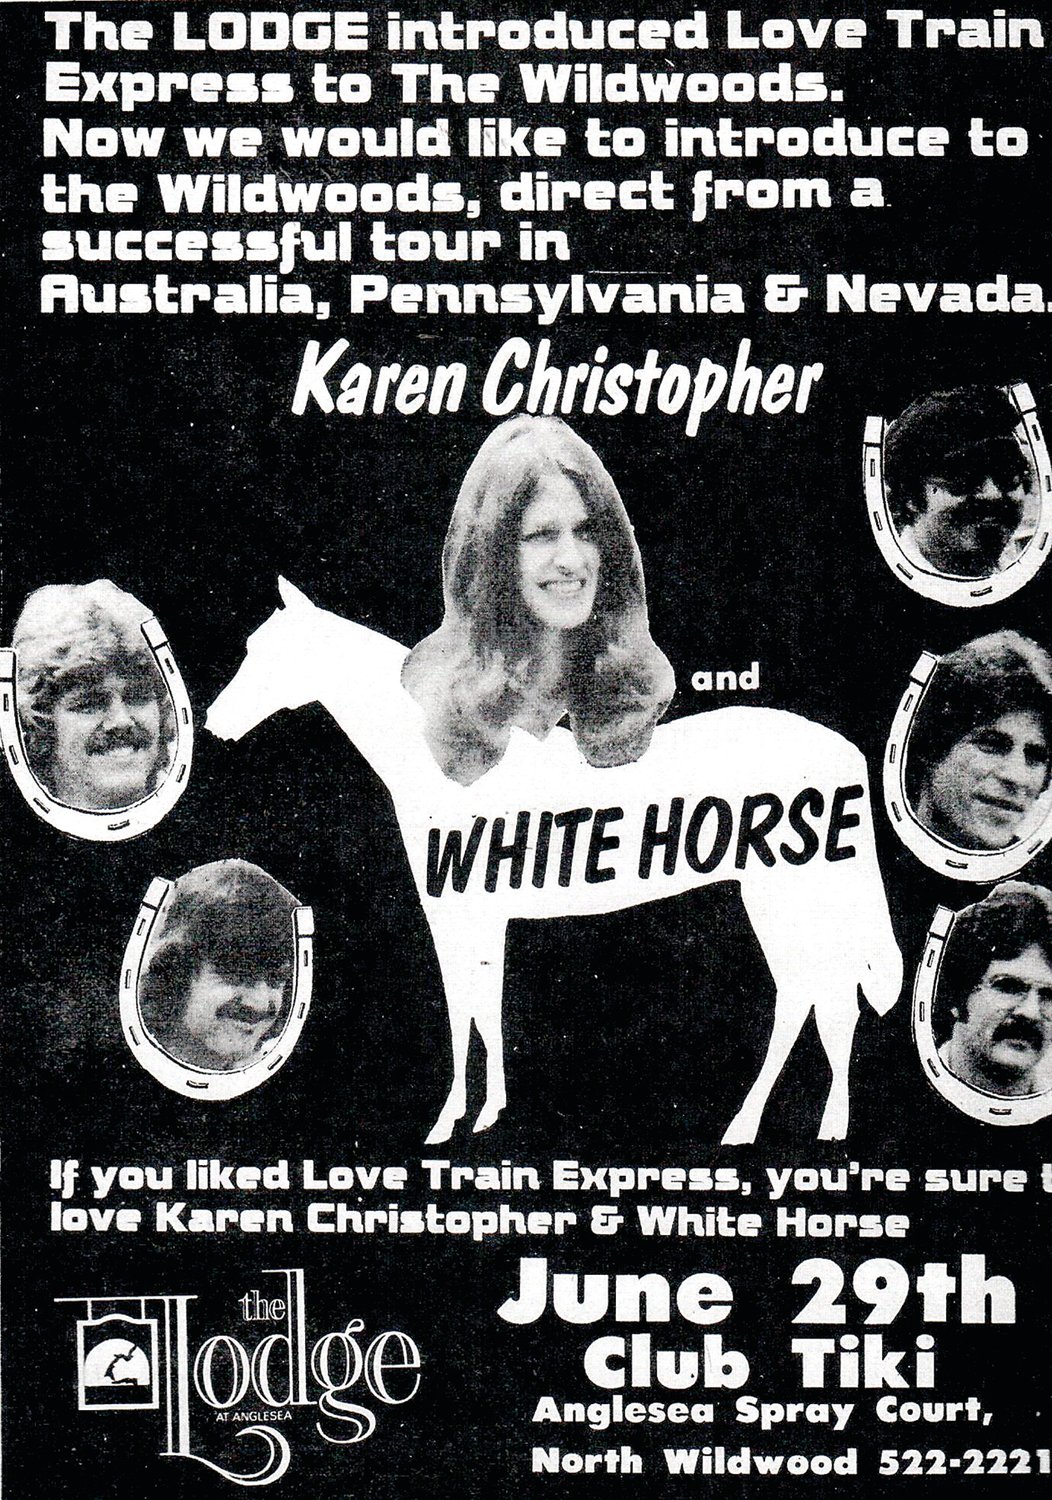 A 1970s advertisement for Karen Christopher and her band White Horse.